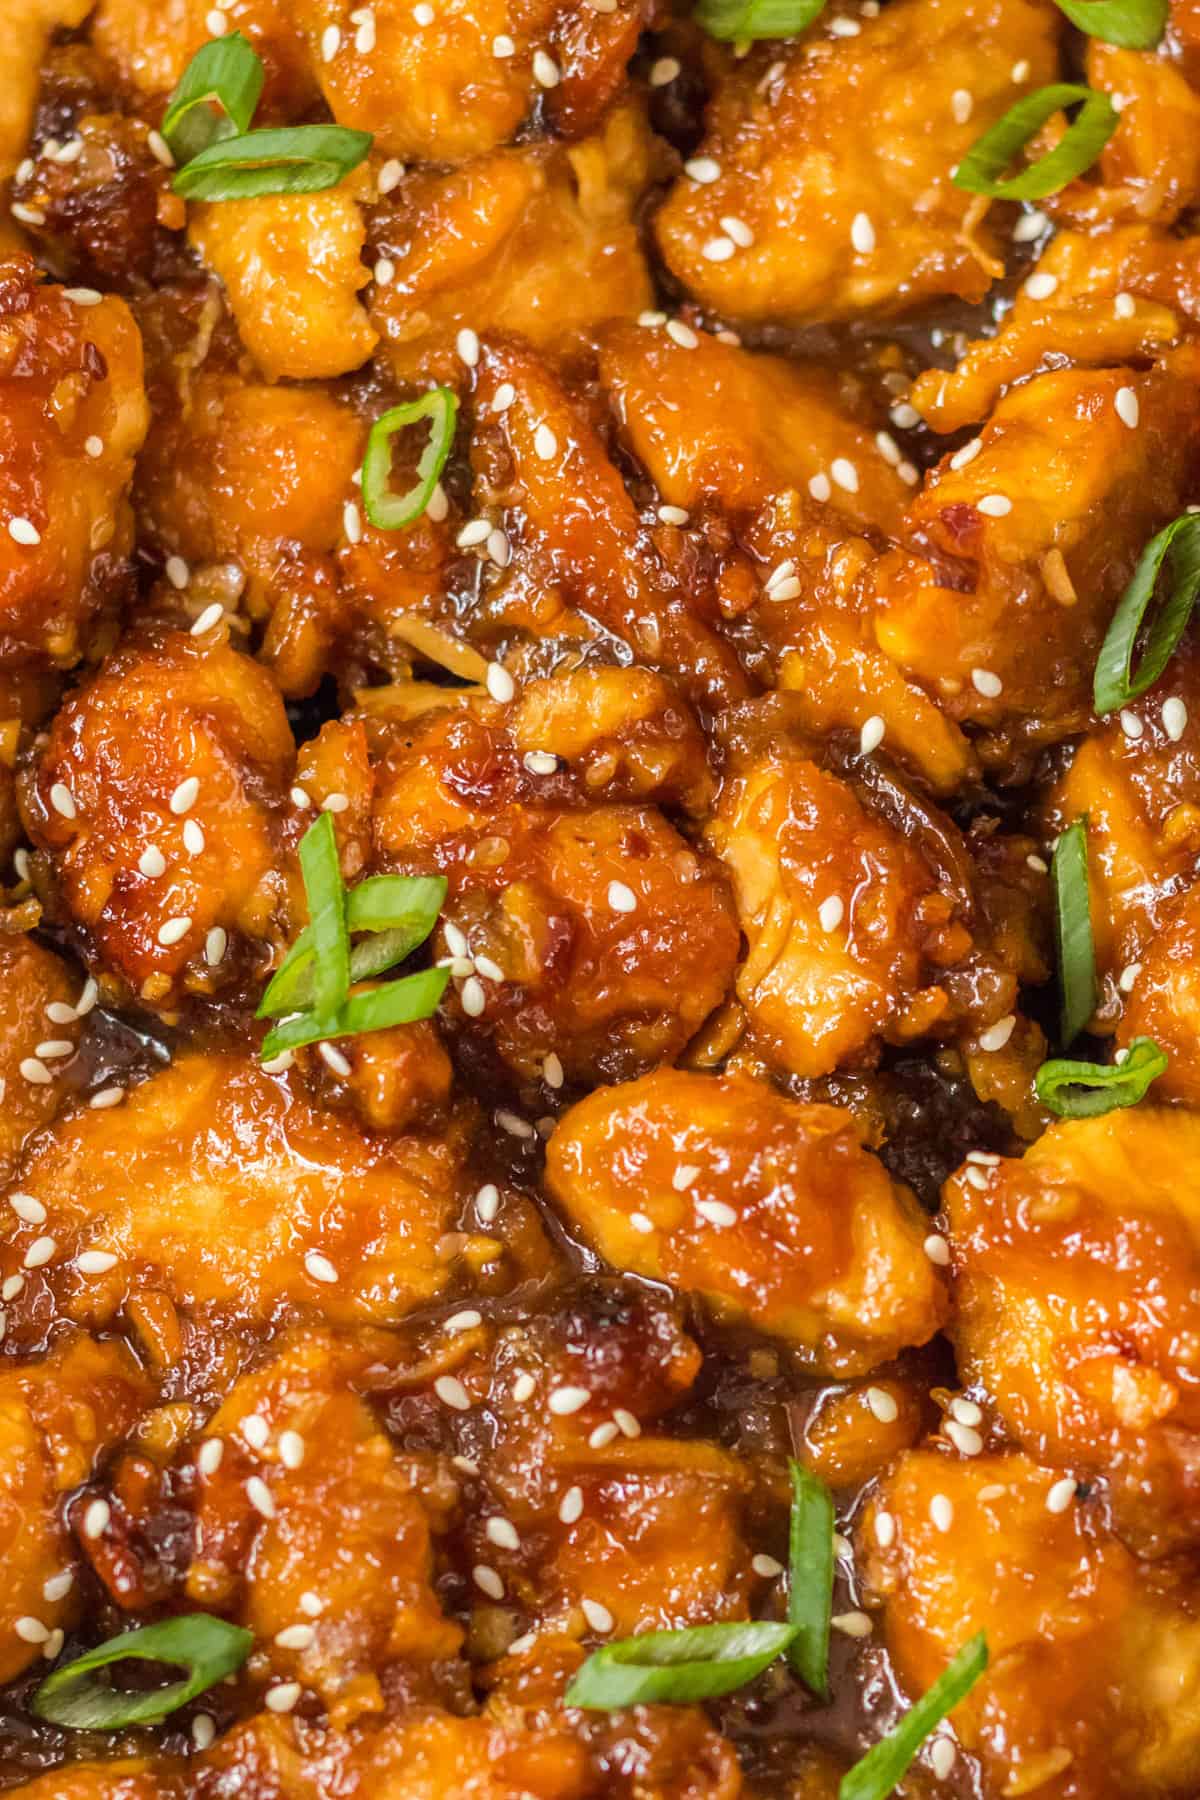 Bite-size pieces of take-out style orange chicken.